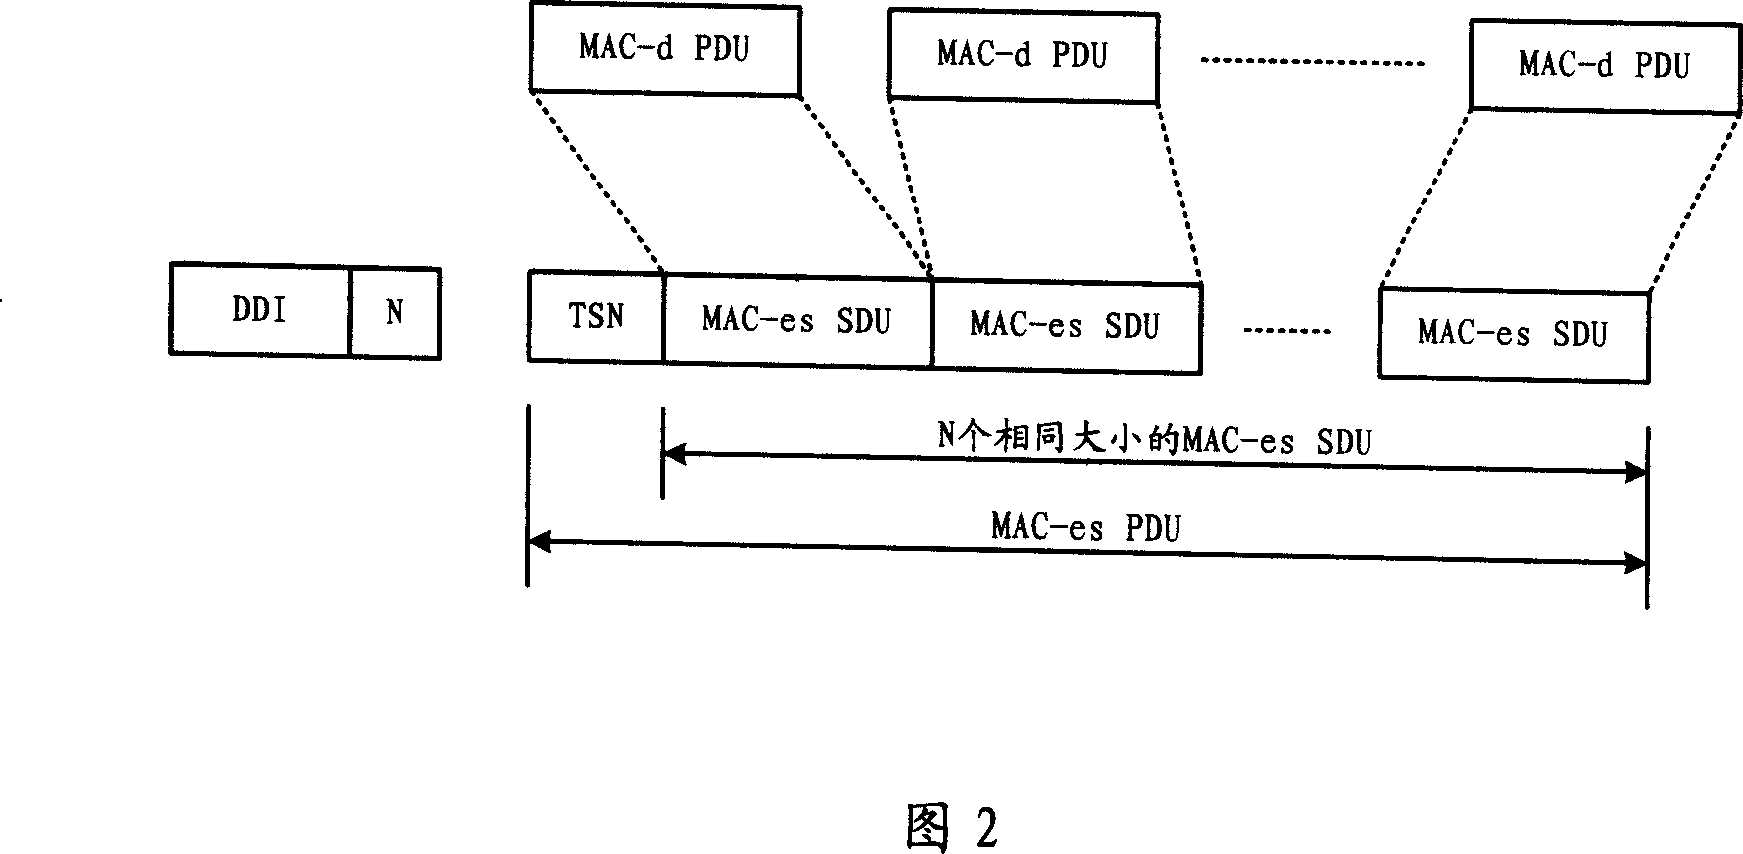 Method and system for transmitting optional field in data packet